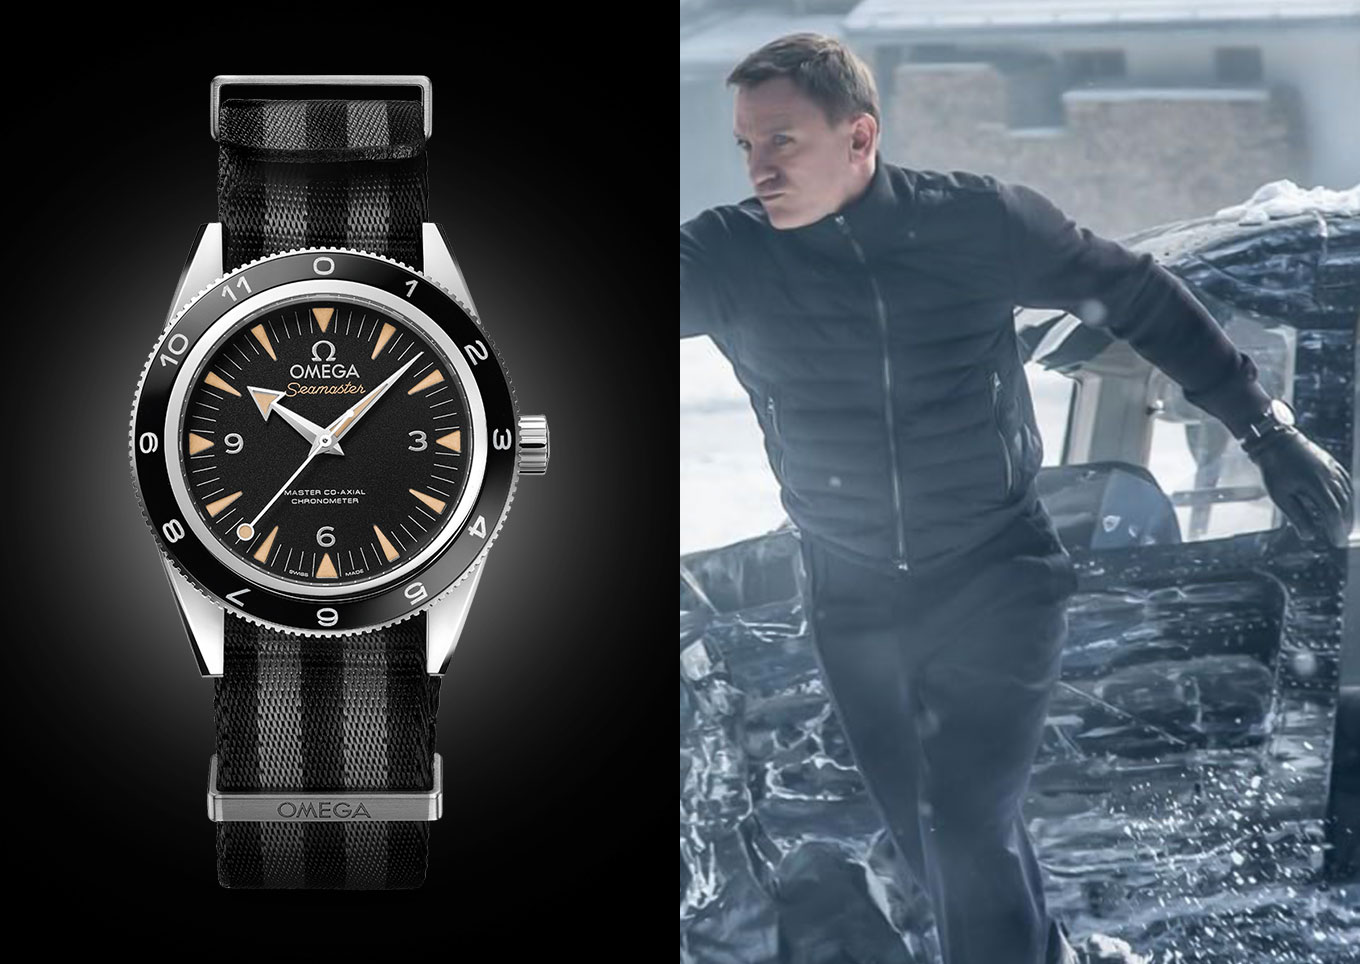 Which watches are worn by James Bond?